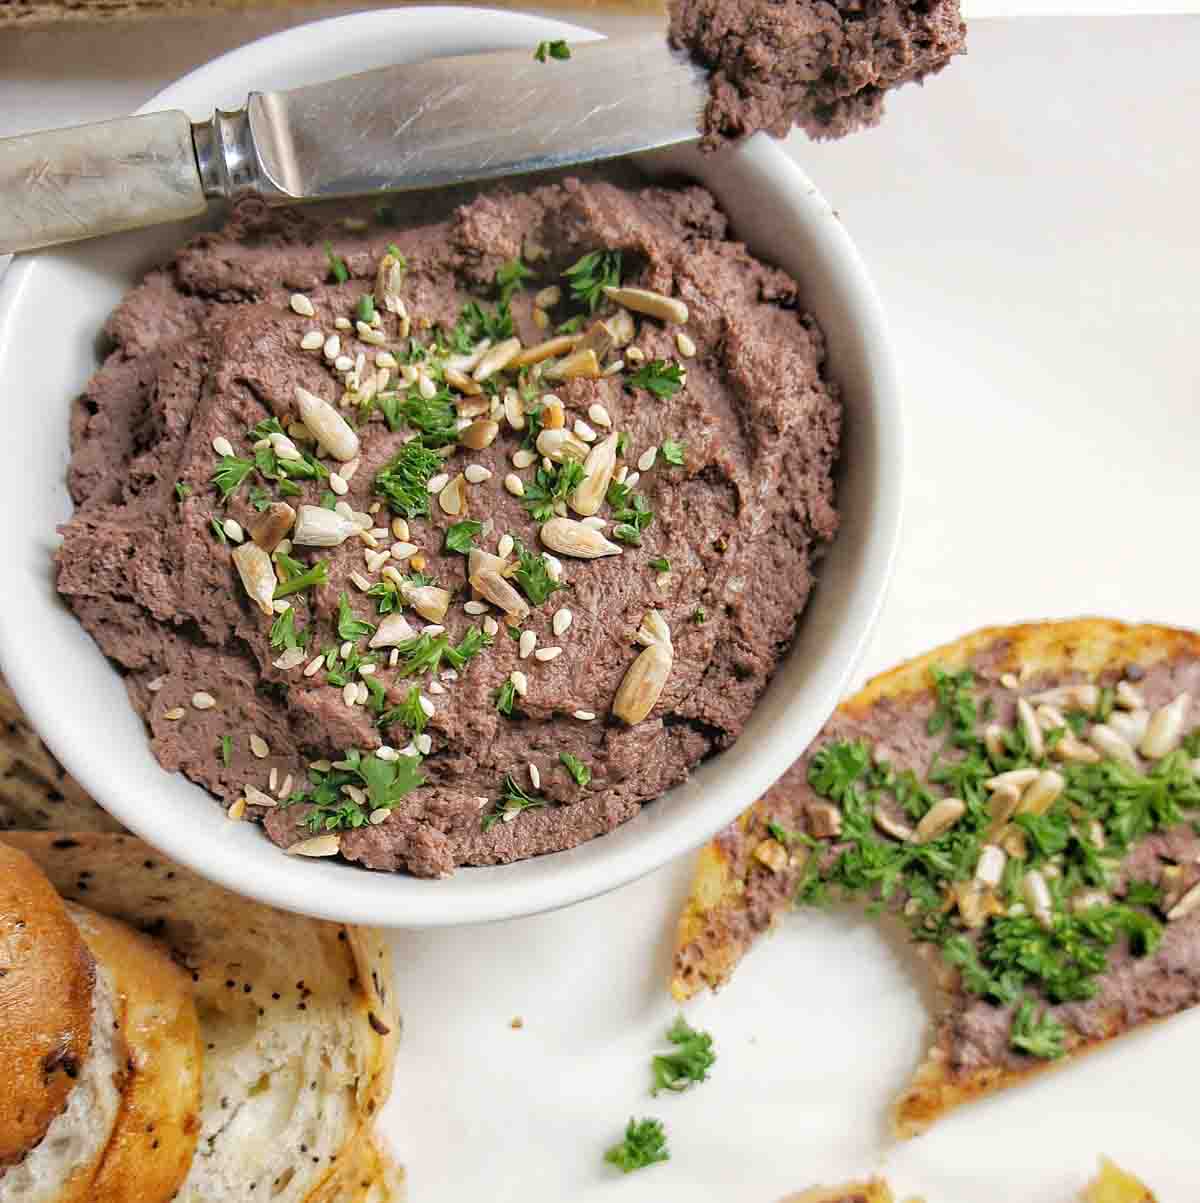 A bowl of chicken liver pate next to a slice of bread with a bite.